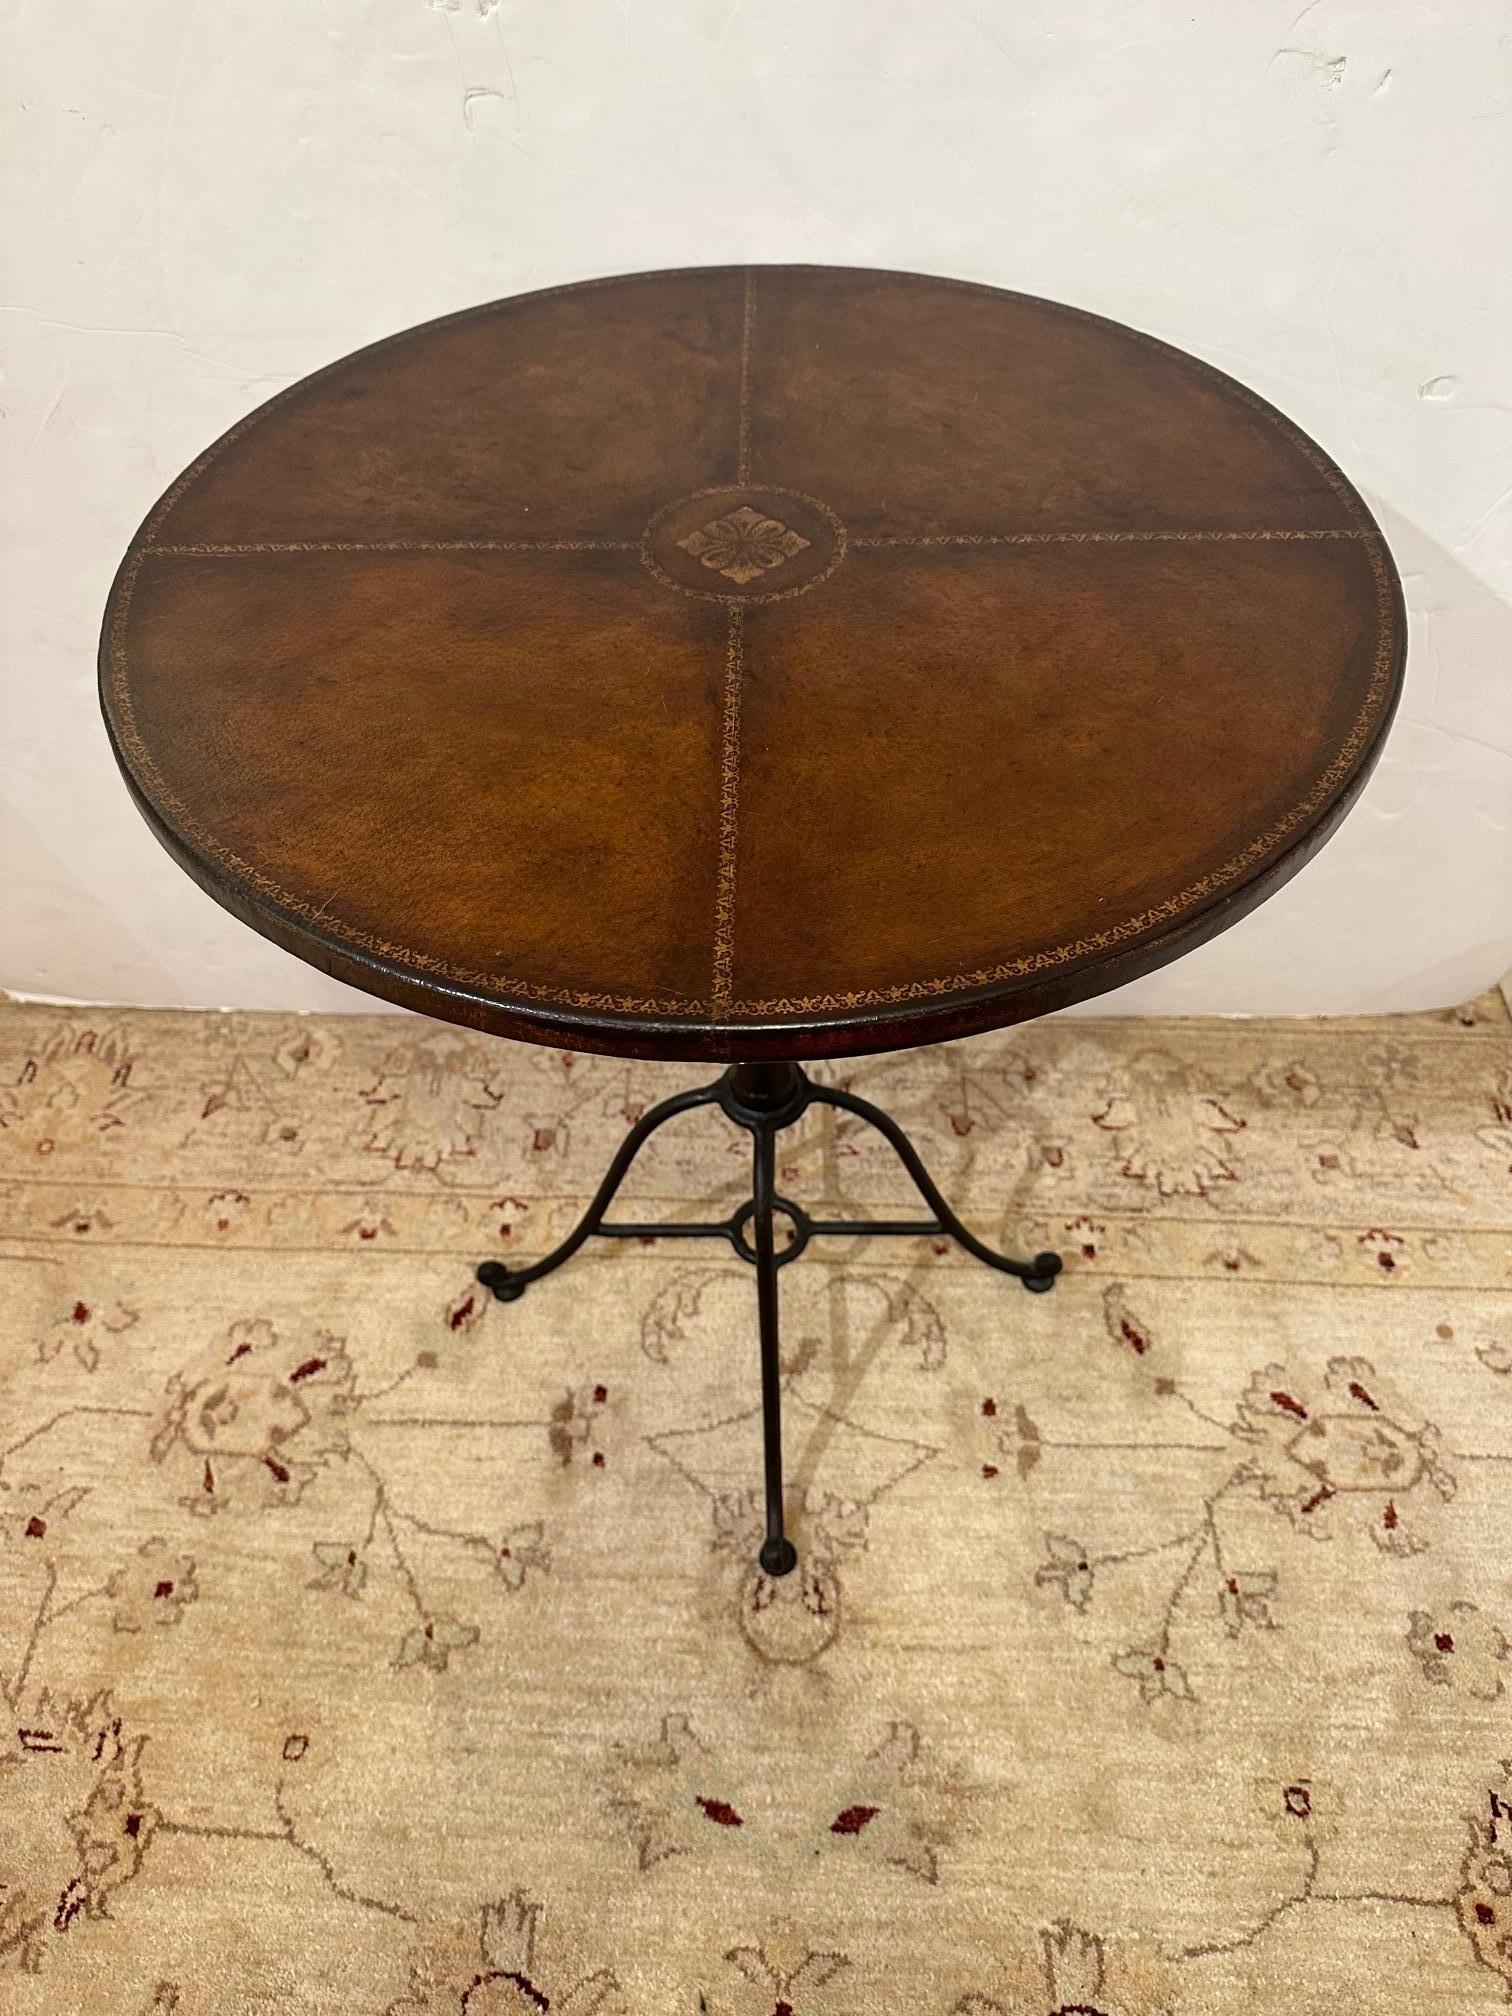 Great looking round side table or small bistro table having hand forged iron base and handsome brown tooled leather top with gold decorative embossing.